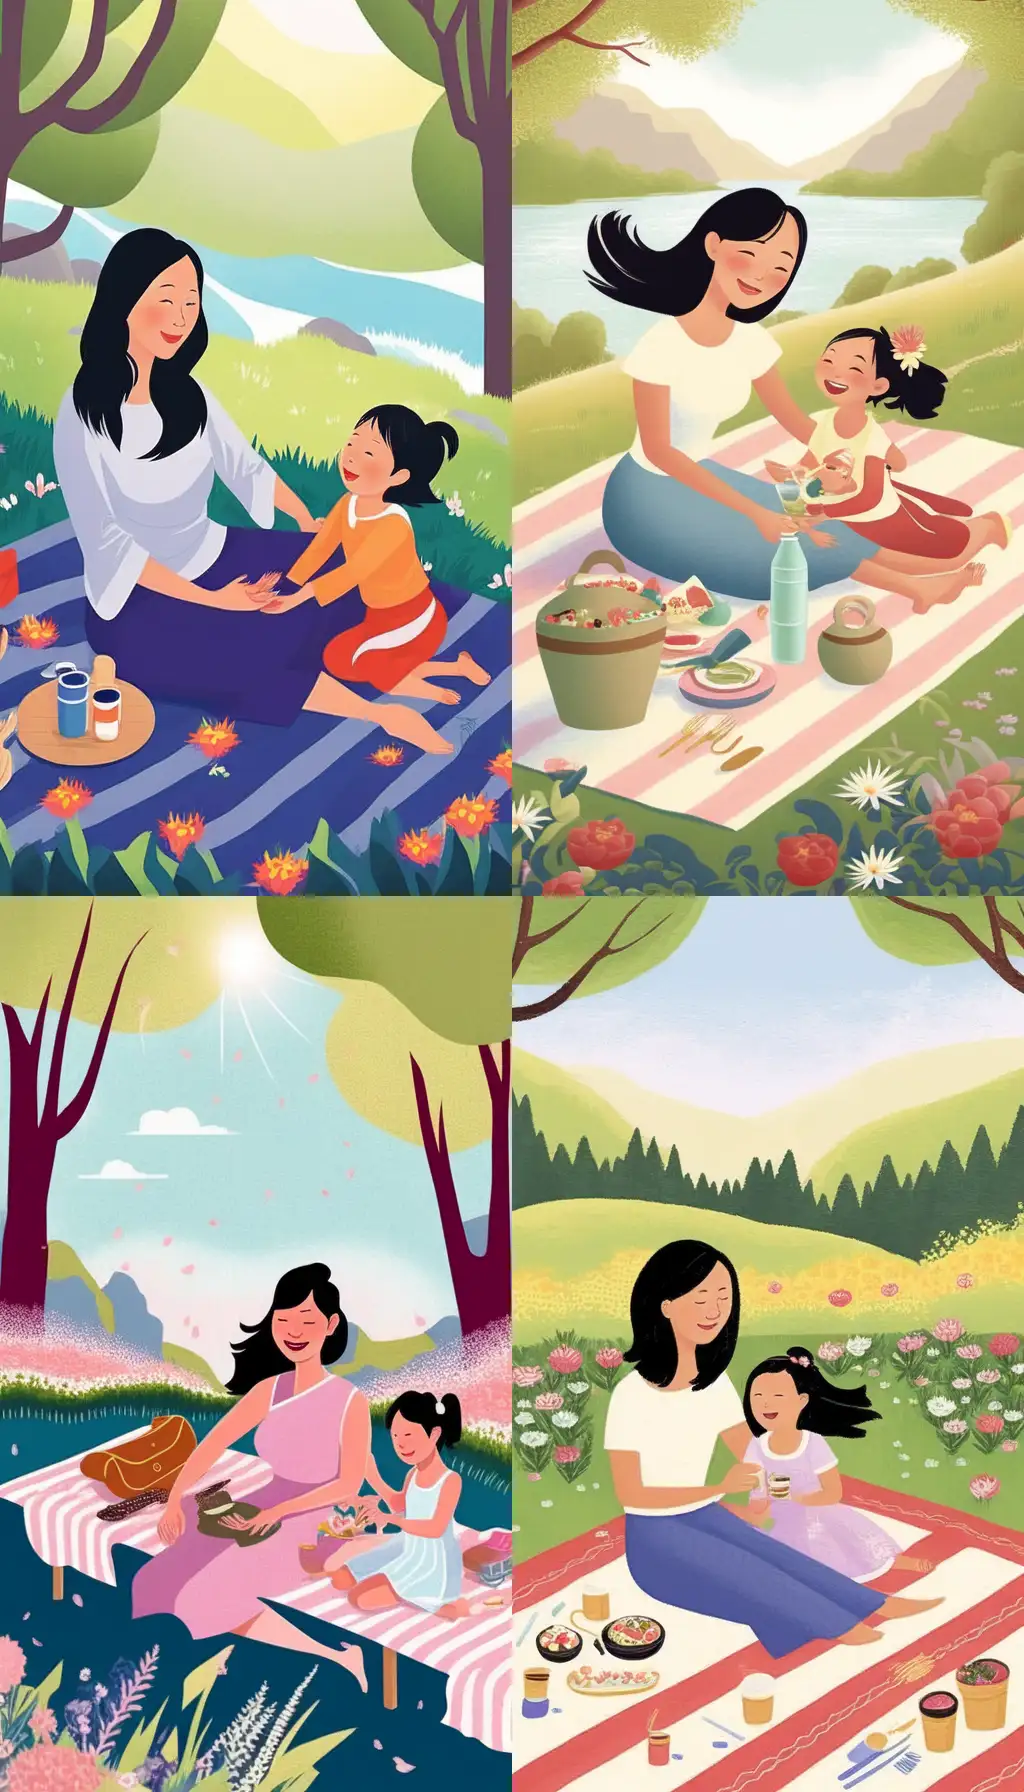 Illustrate a serene Mother's Day scene where a stunning Chinese young mother with her hair cascading down her shoulders shares a blissful laugh with her little daughter. They are sitting on a picnic blanket, surrounded by nature's splendor with flowers, greenery, and dappled sunlight creating a picturesque setting. The illustration should have generous empty space to reflect peace and the simplicity of the precious moment --ar 9:16